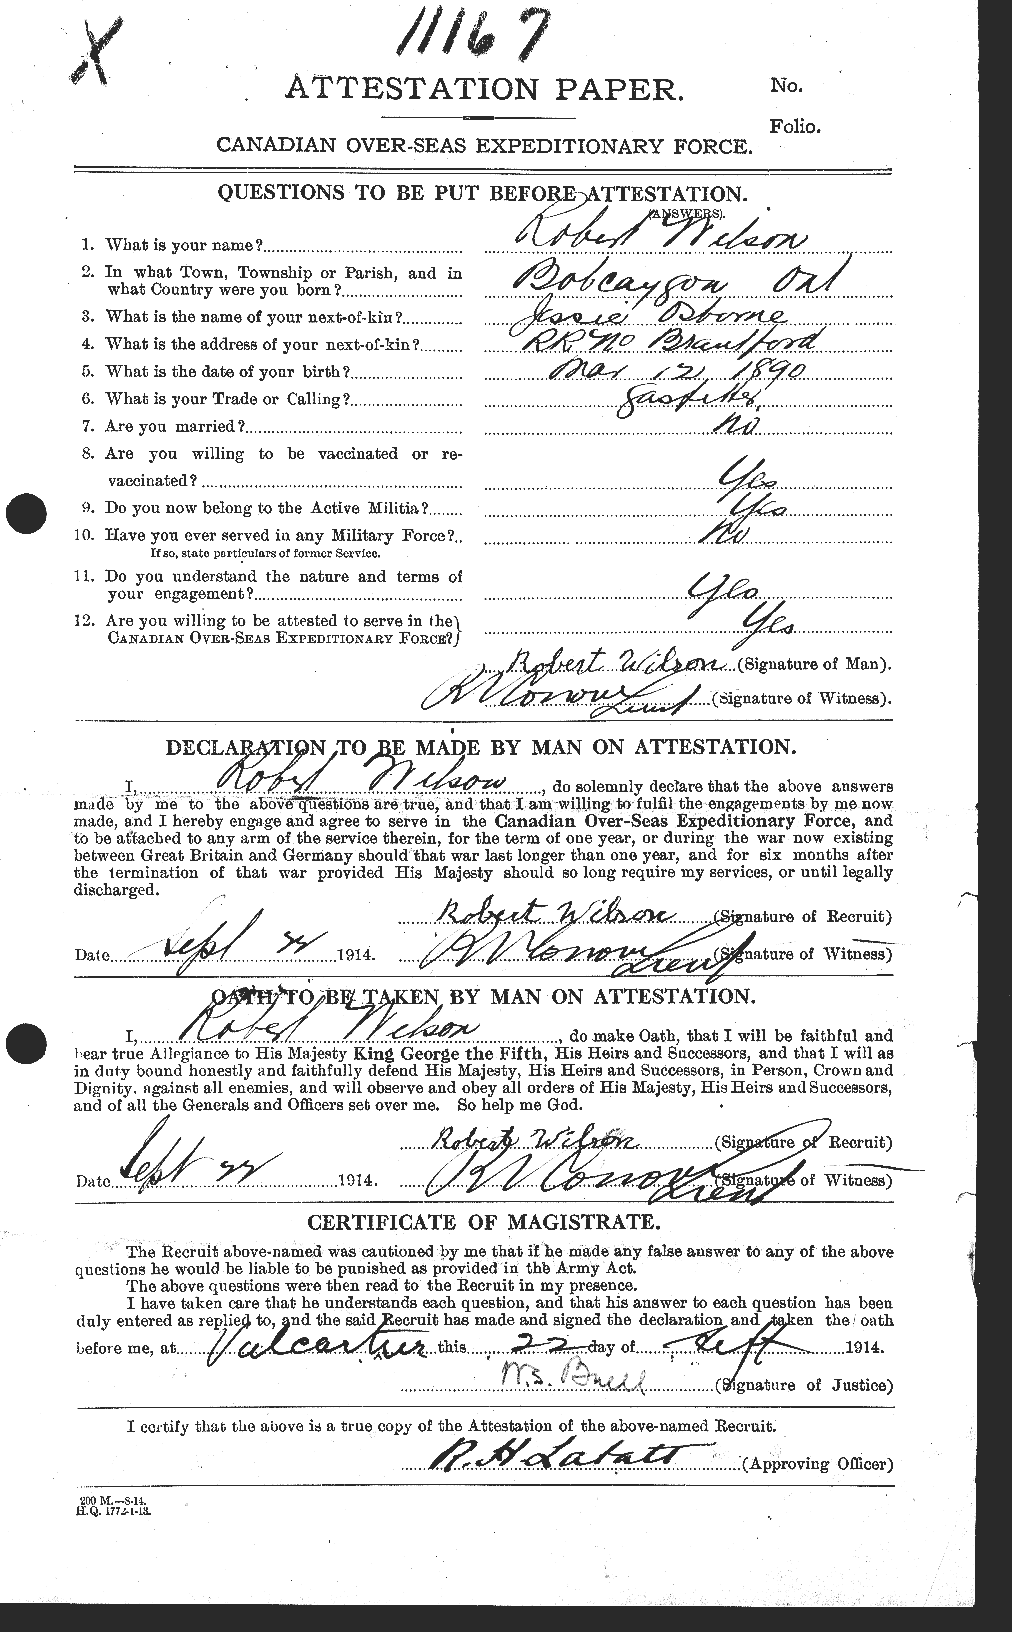 Personnel Records of the First World War - CEF 678870a